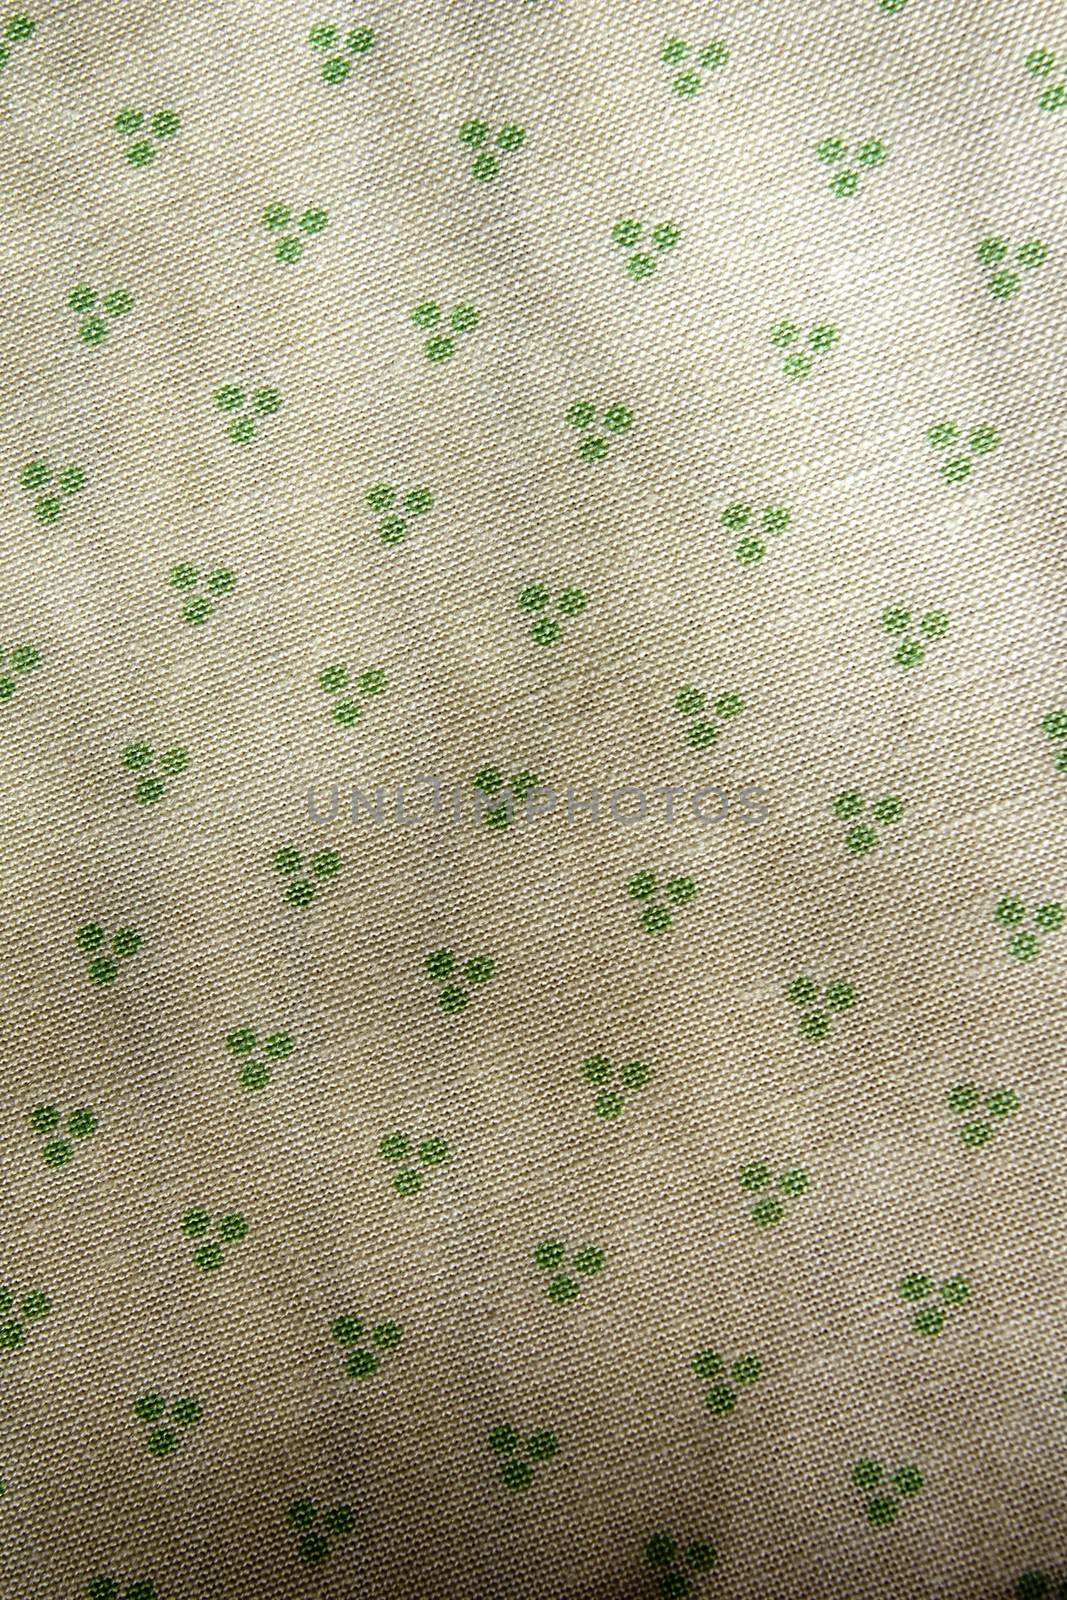 Fabric as background by VIPDesignUSA